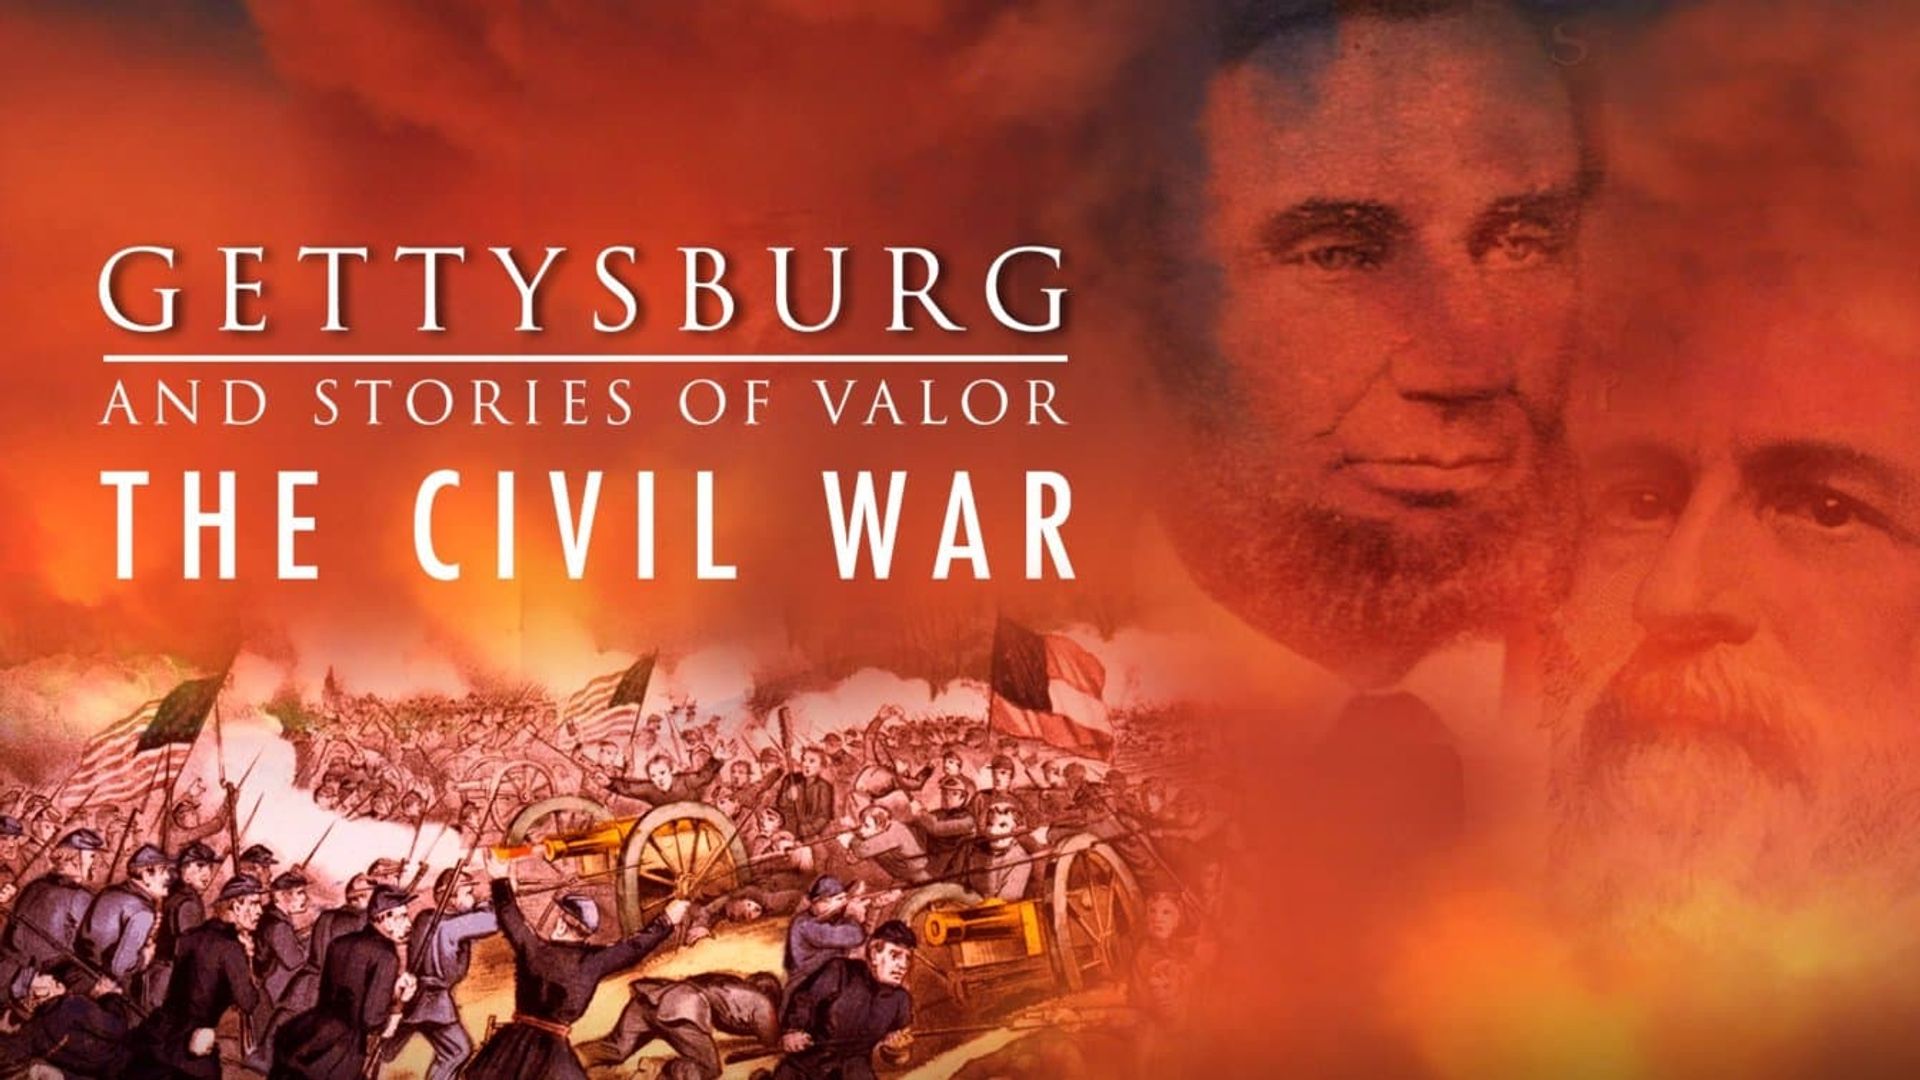 Gettysburg and Stories of Valor - The Battle of Gettysburg background